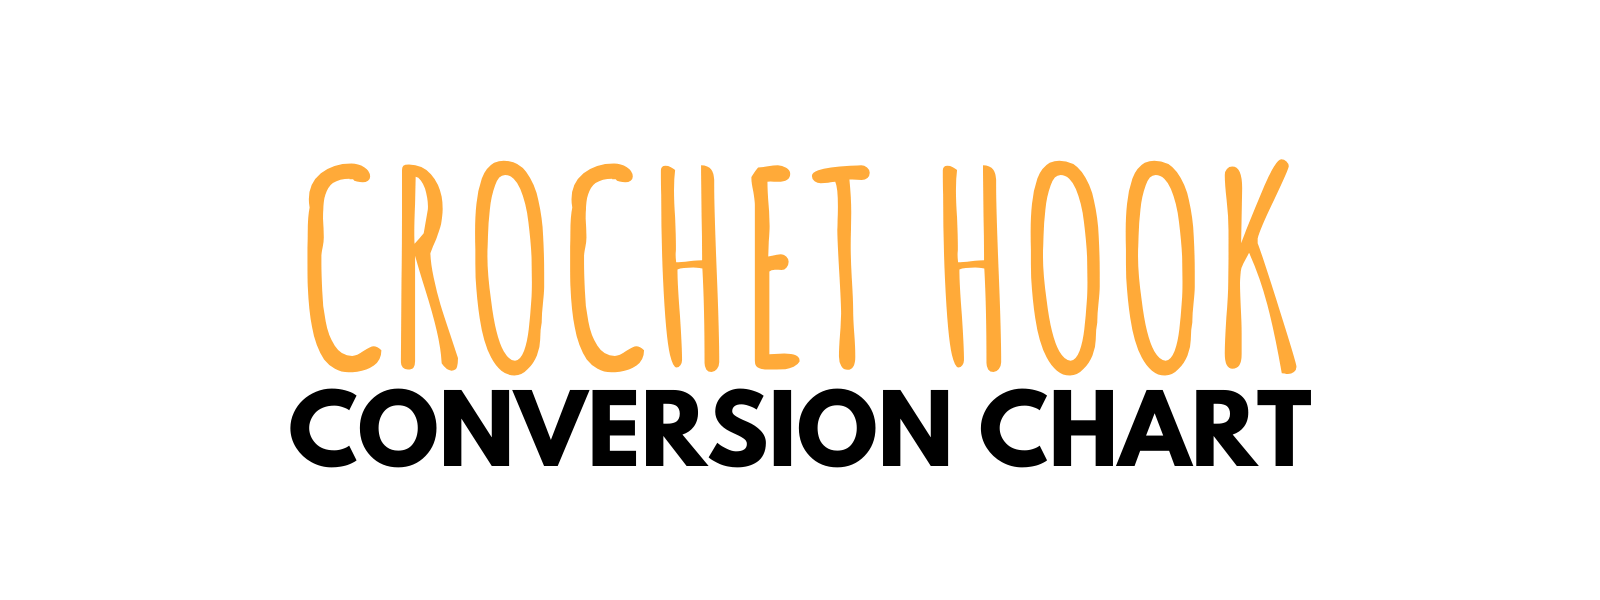 https://www.dontbesuchasquare.com/wp-content/uploads/2021/01/Crochet-hook-conversion-chart.png